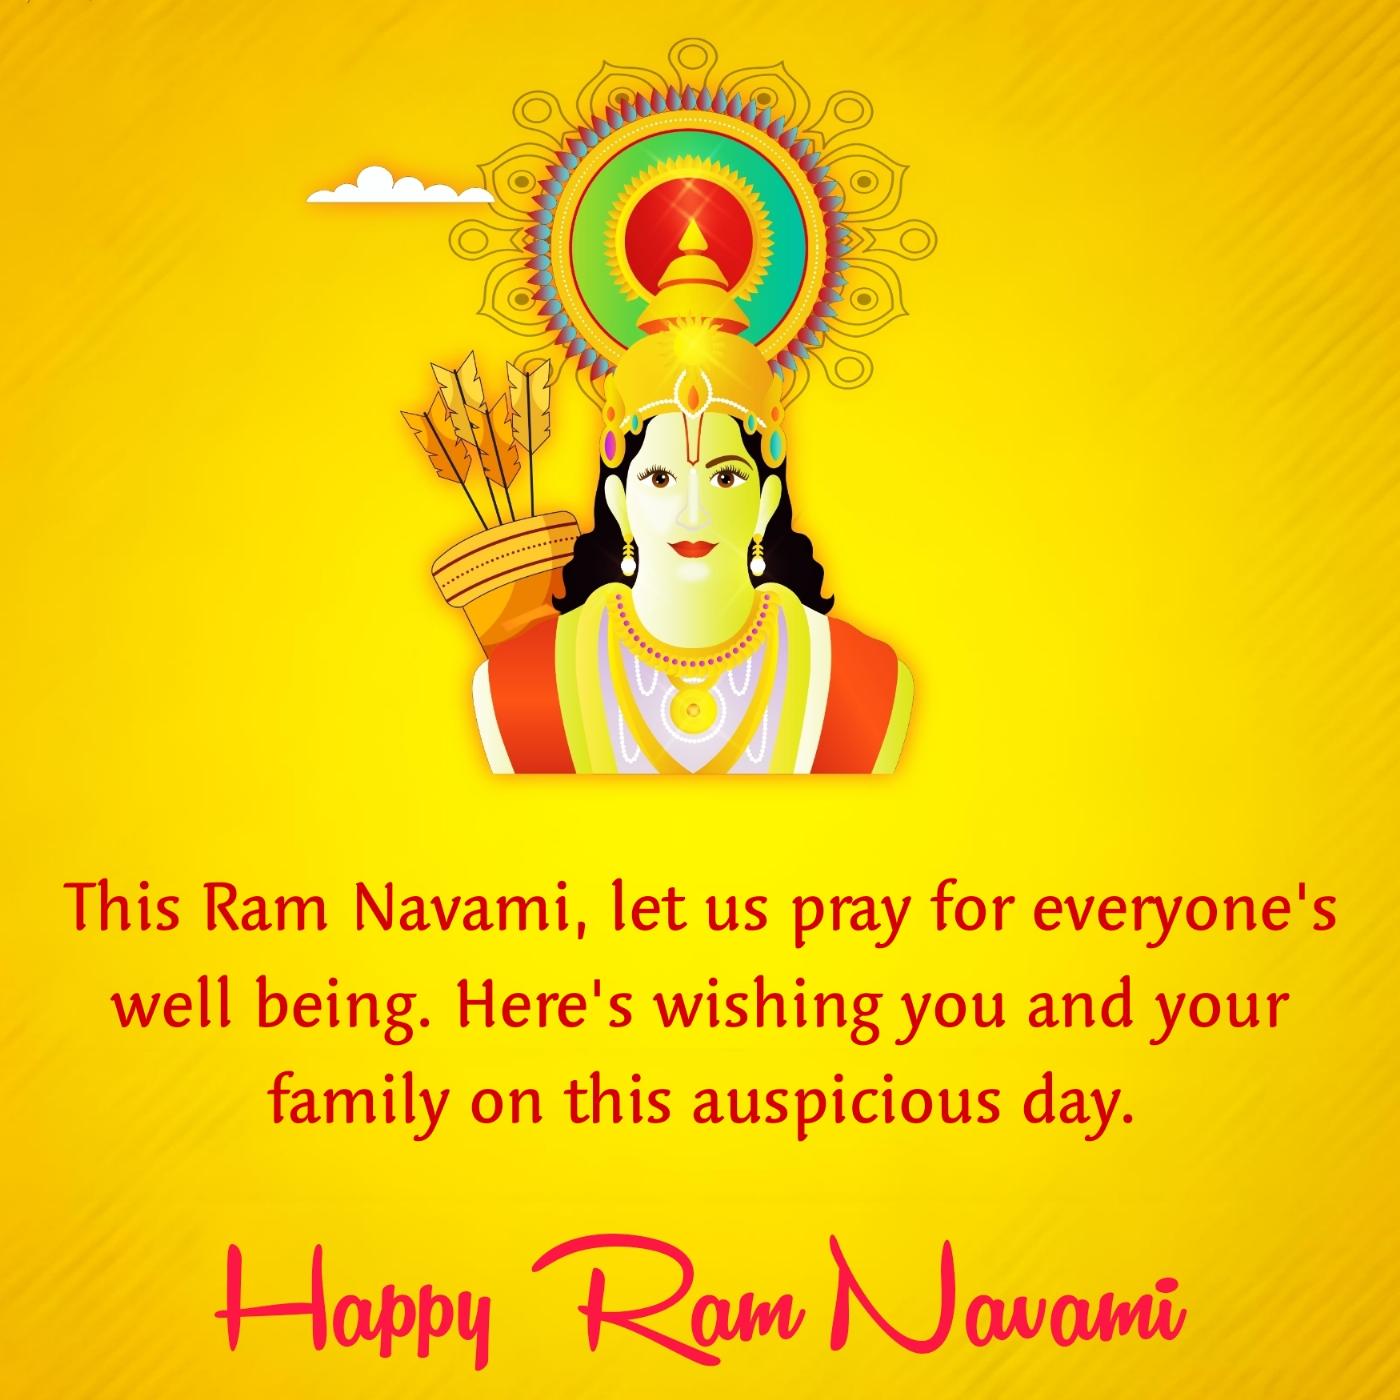 This Ram Navami let us pray for everyone's well being